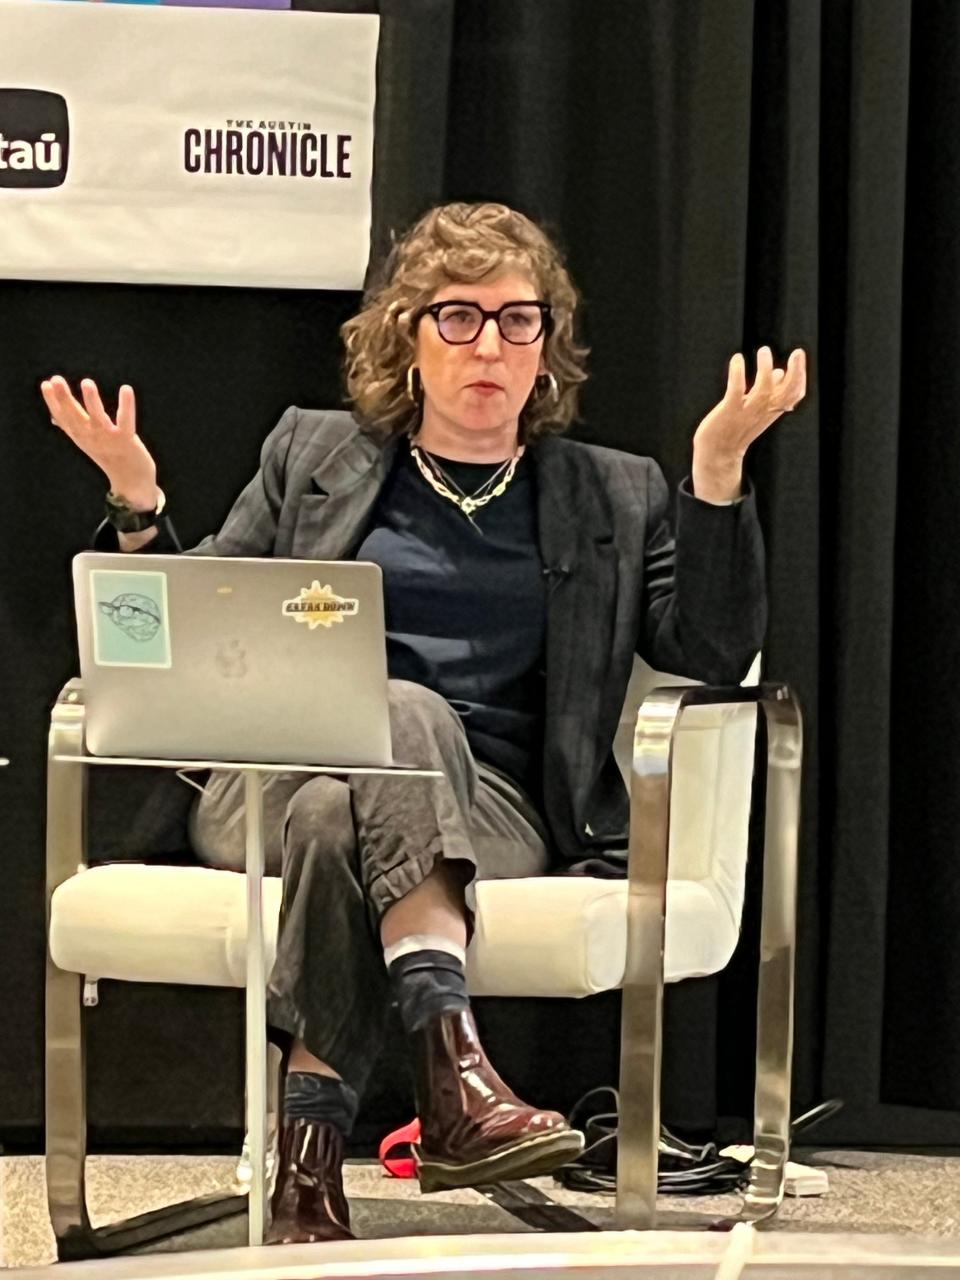 Actress Mayim Bialik talked March 10 about the mind, body and spirit and how they work together at a SXSW recording of her podcast "The Breakdown." One way to build that connection is through psychedelics, as well as yoga, prayer and meditation, she said.